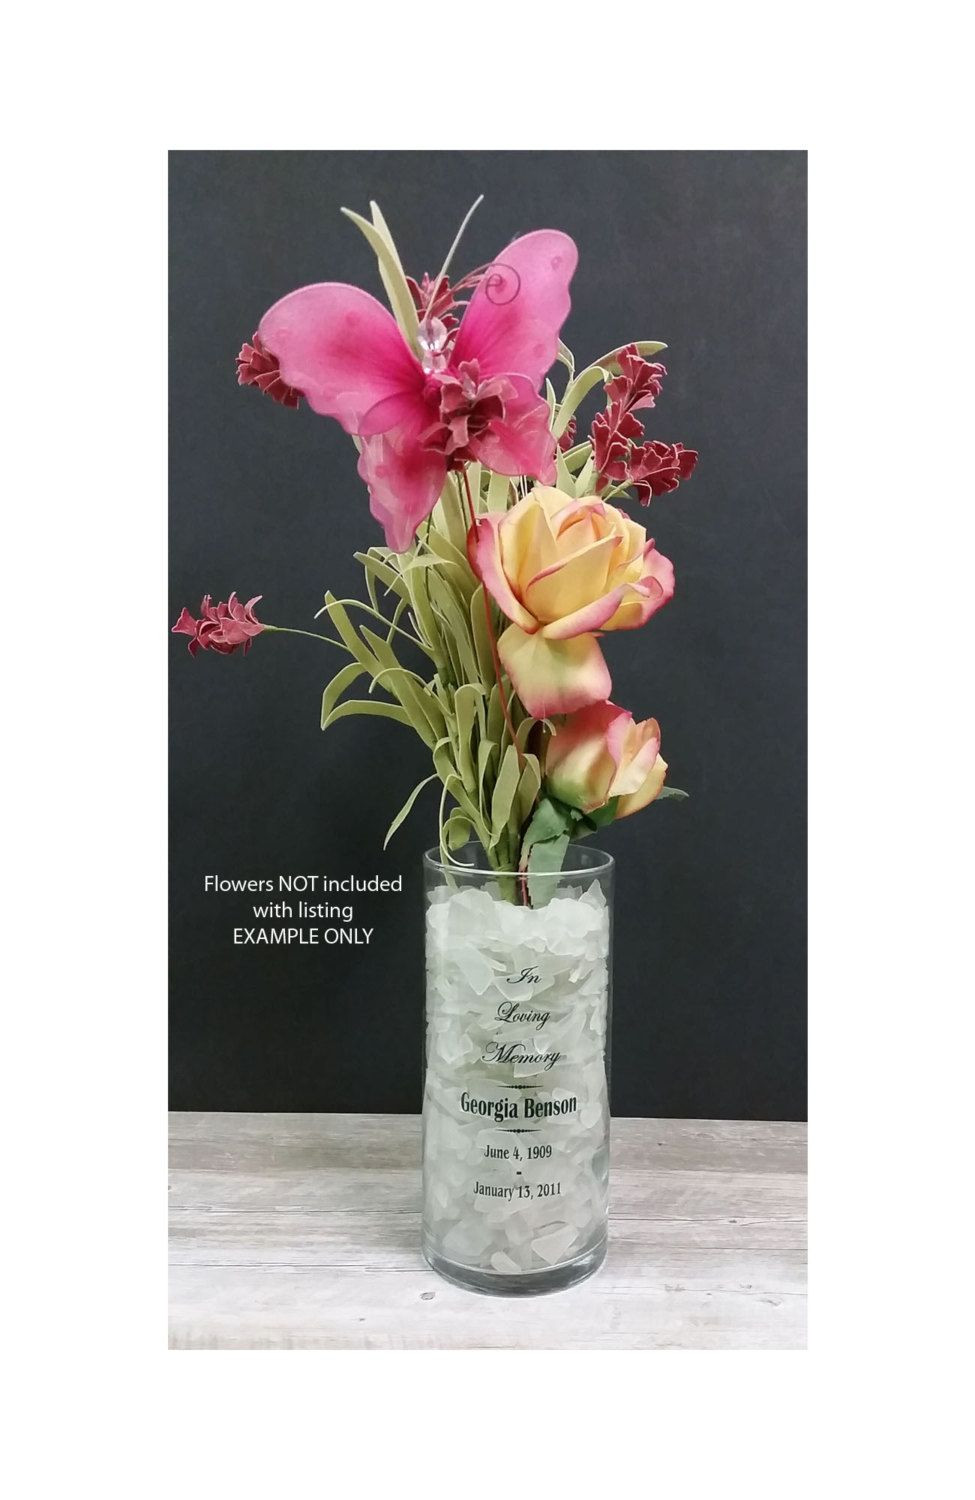 personalized flower vase photo of memorial vase clear glass flower vase frosted white sea glass throughout memorial vase clear glass flower vase frosted white sea glass filler engraved